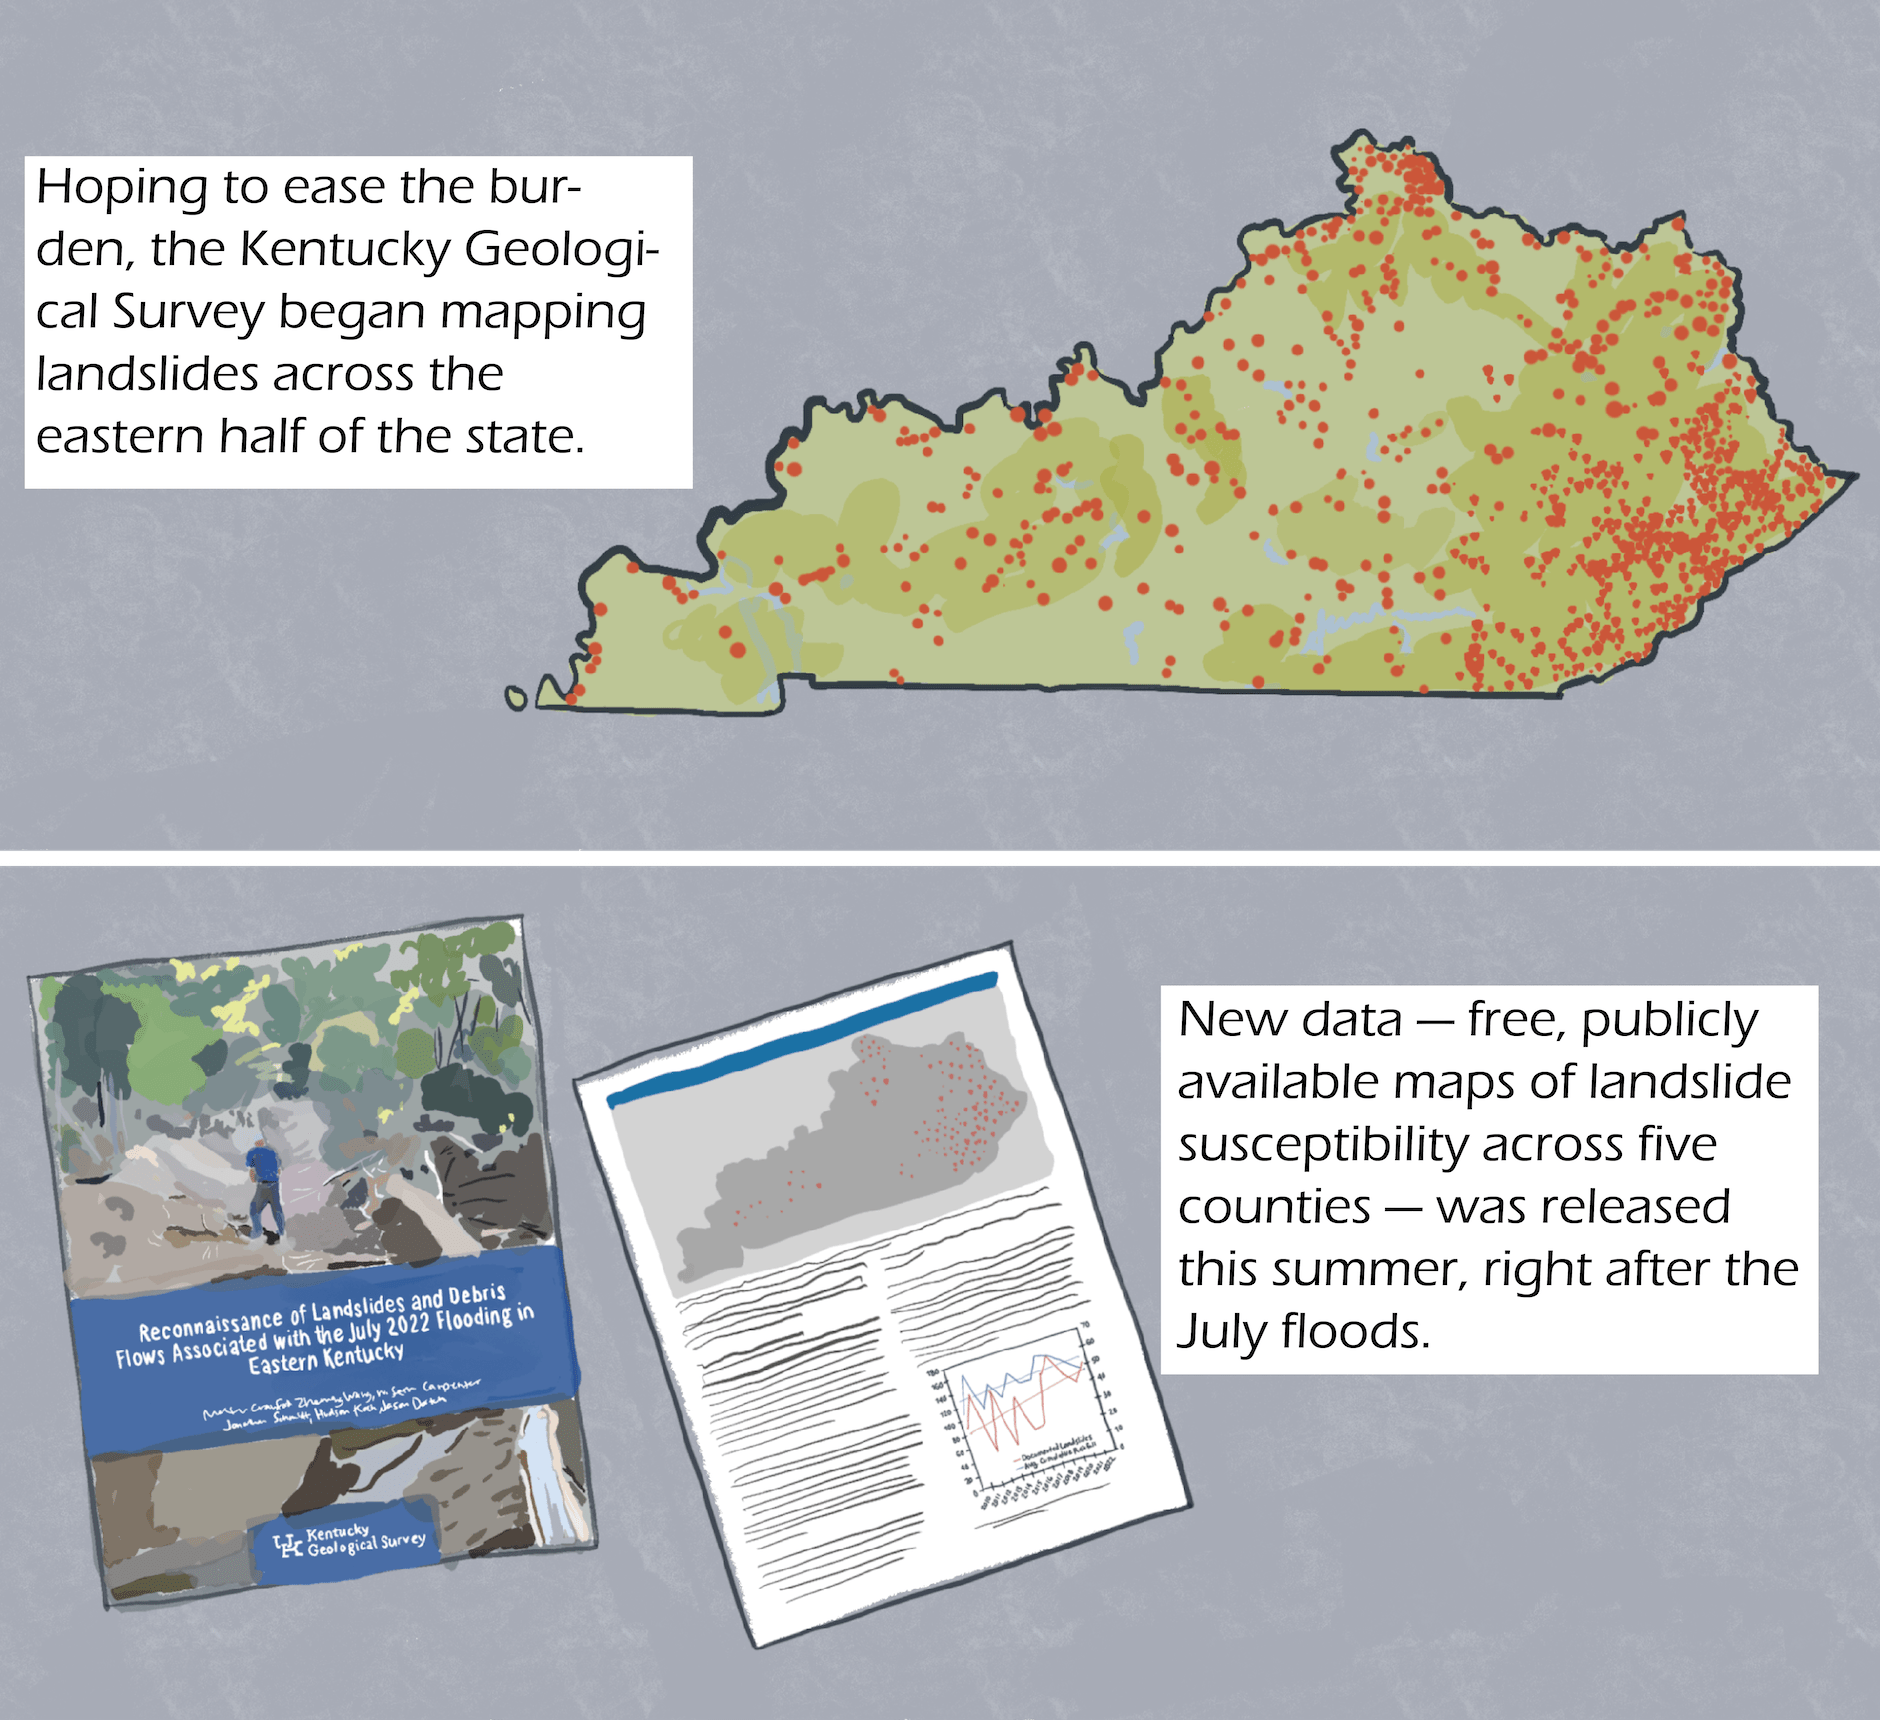 top image: the state of kentucky with red dots marking parts of eastern Kentucky. Text:Hoping to ease the burden, the Kentucky Geological Survey began mapping landslides across the eastern half of the state. -- Bottom: a brochure with landslides. Text: New data — free, publicly available maps of landslide susceptibility across five counties — was released this summer, right after the July floods.